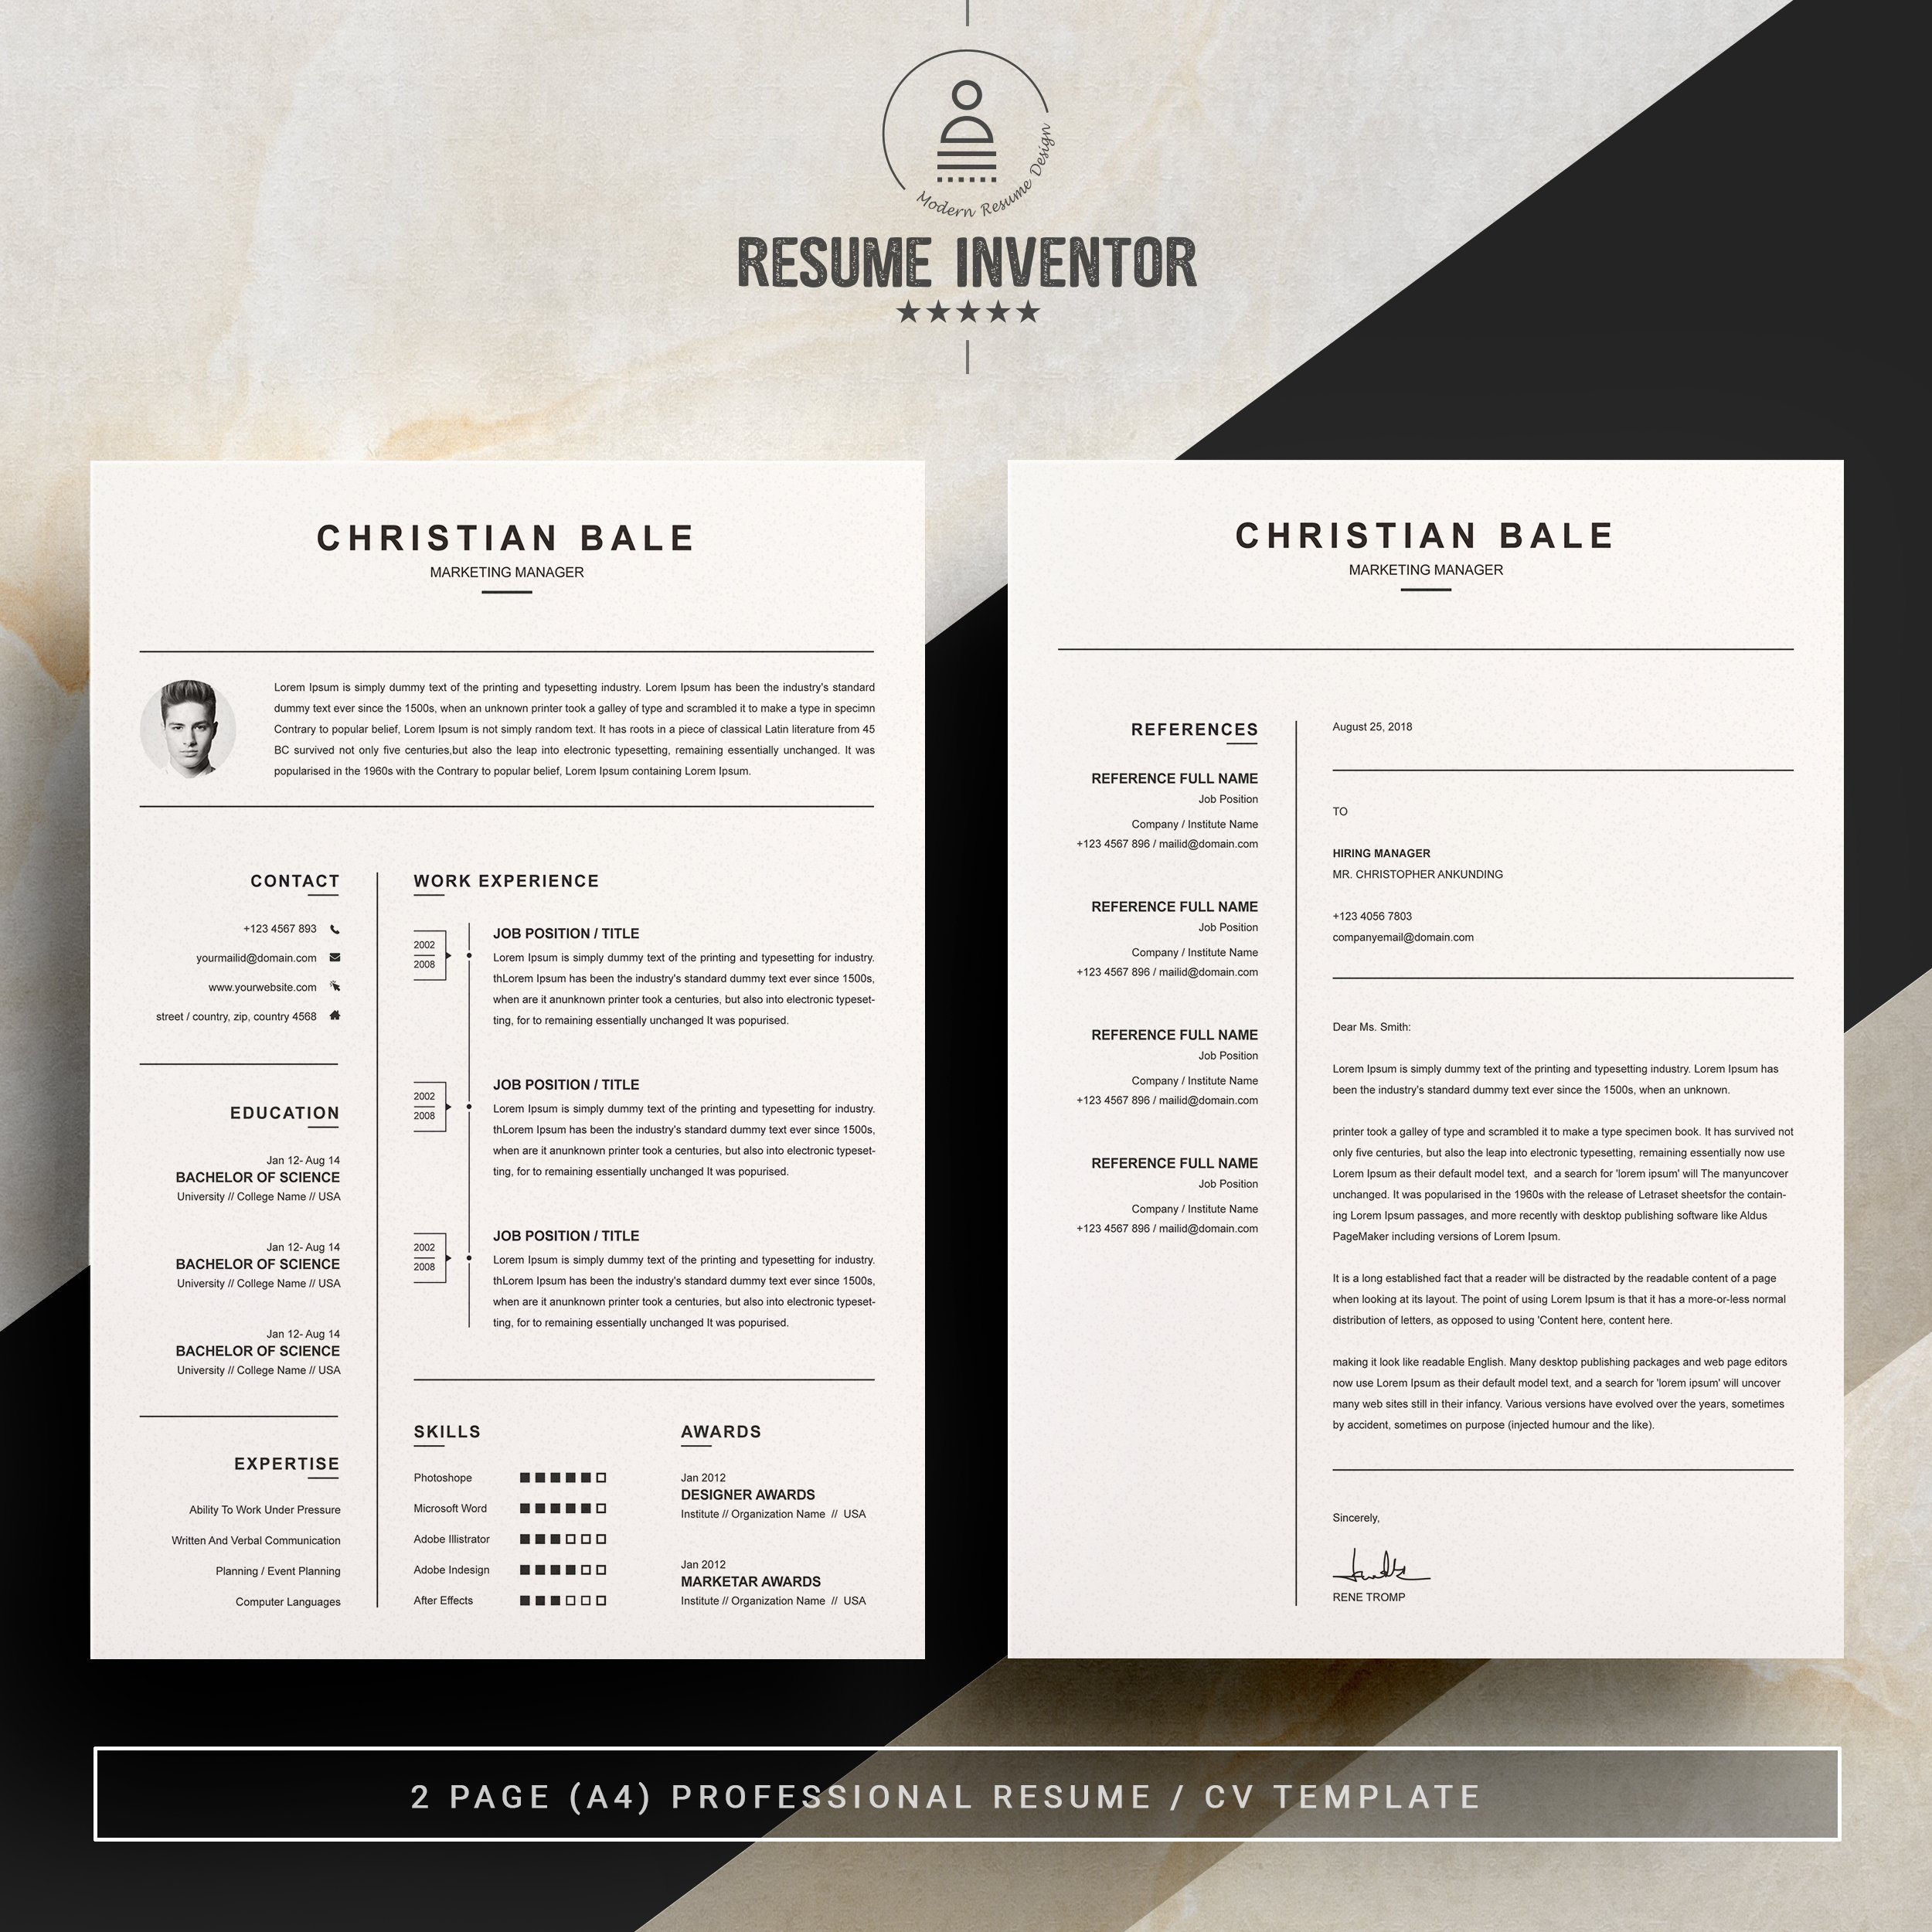 CV / Resume Template | MS Word preview image.